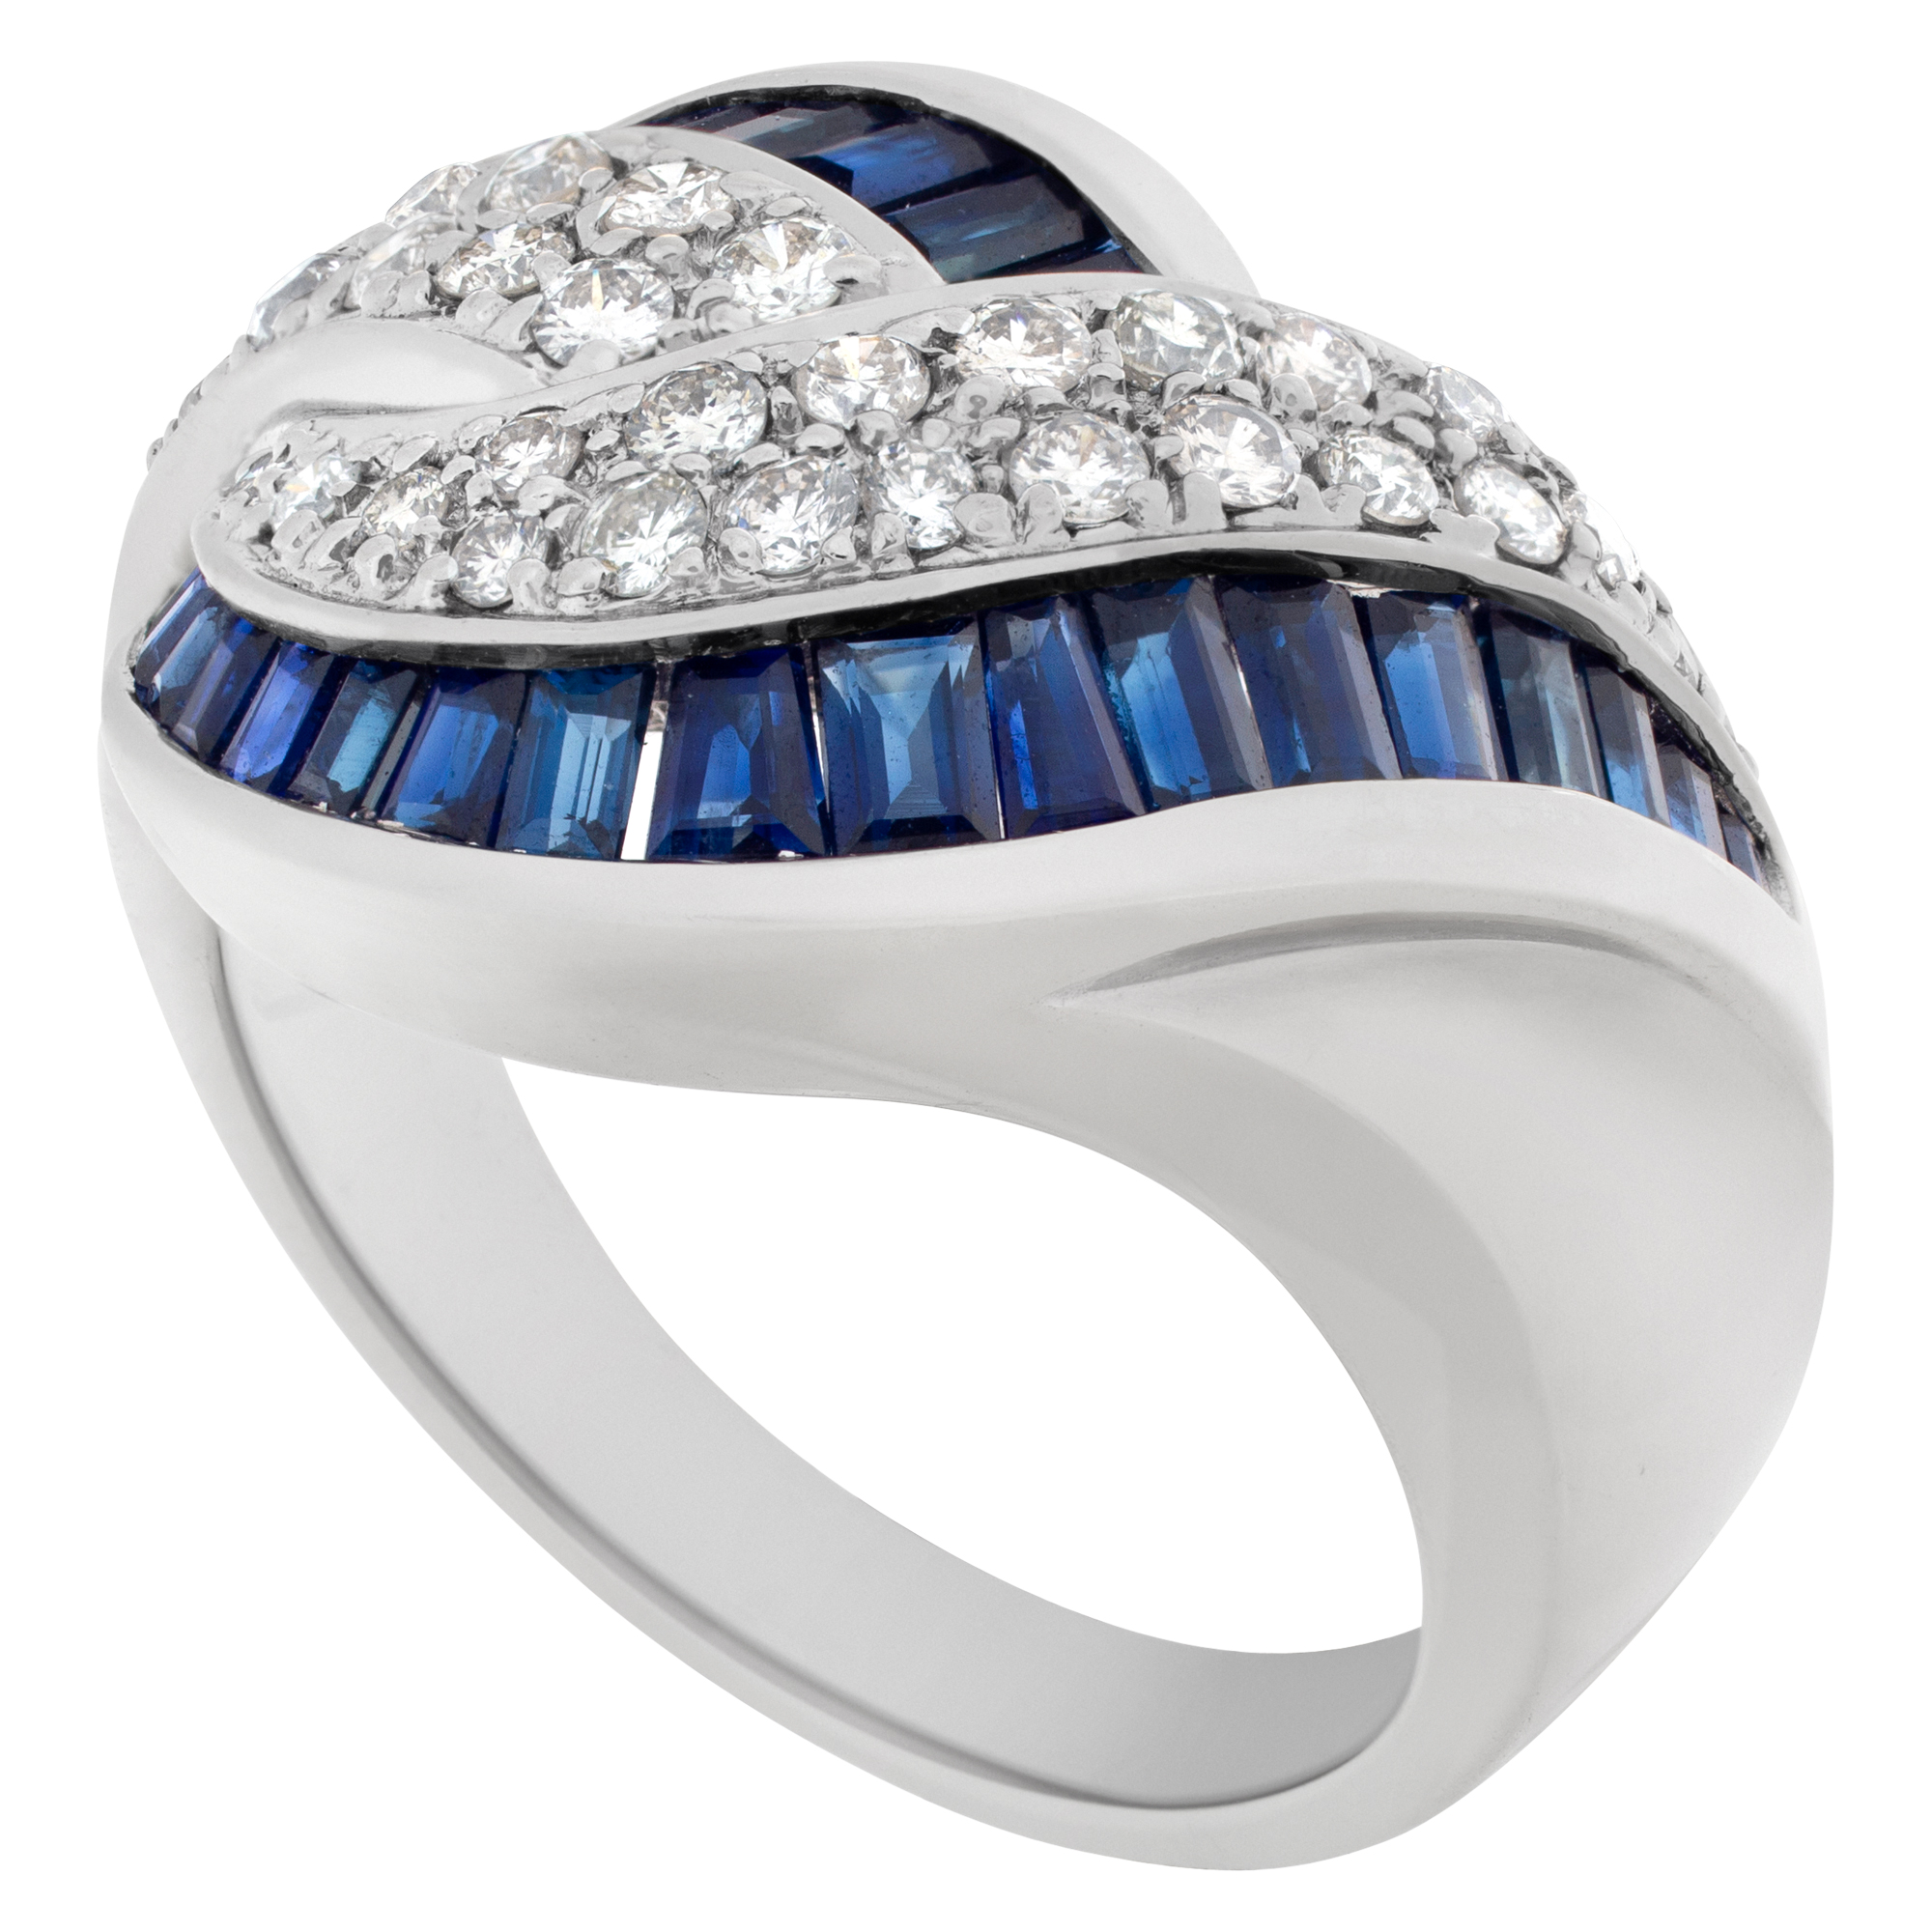 Criss-Cross sapphire & diamond ring in 14K white gold. Approx 1 carat tapered emerald cut sapphire and 0.75 carat full cut round diamond. image 4